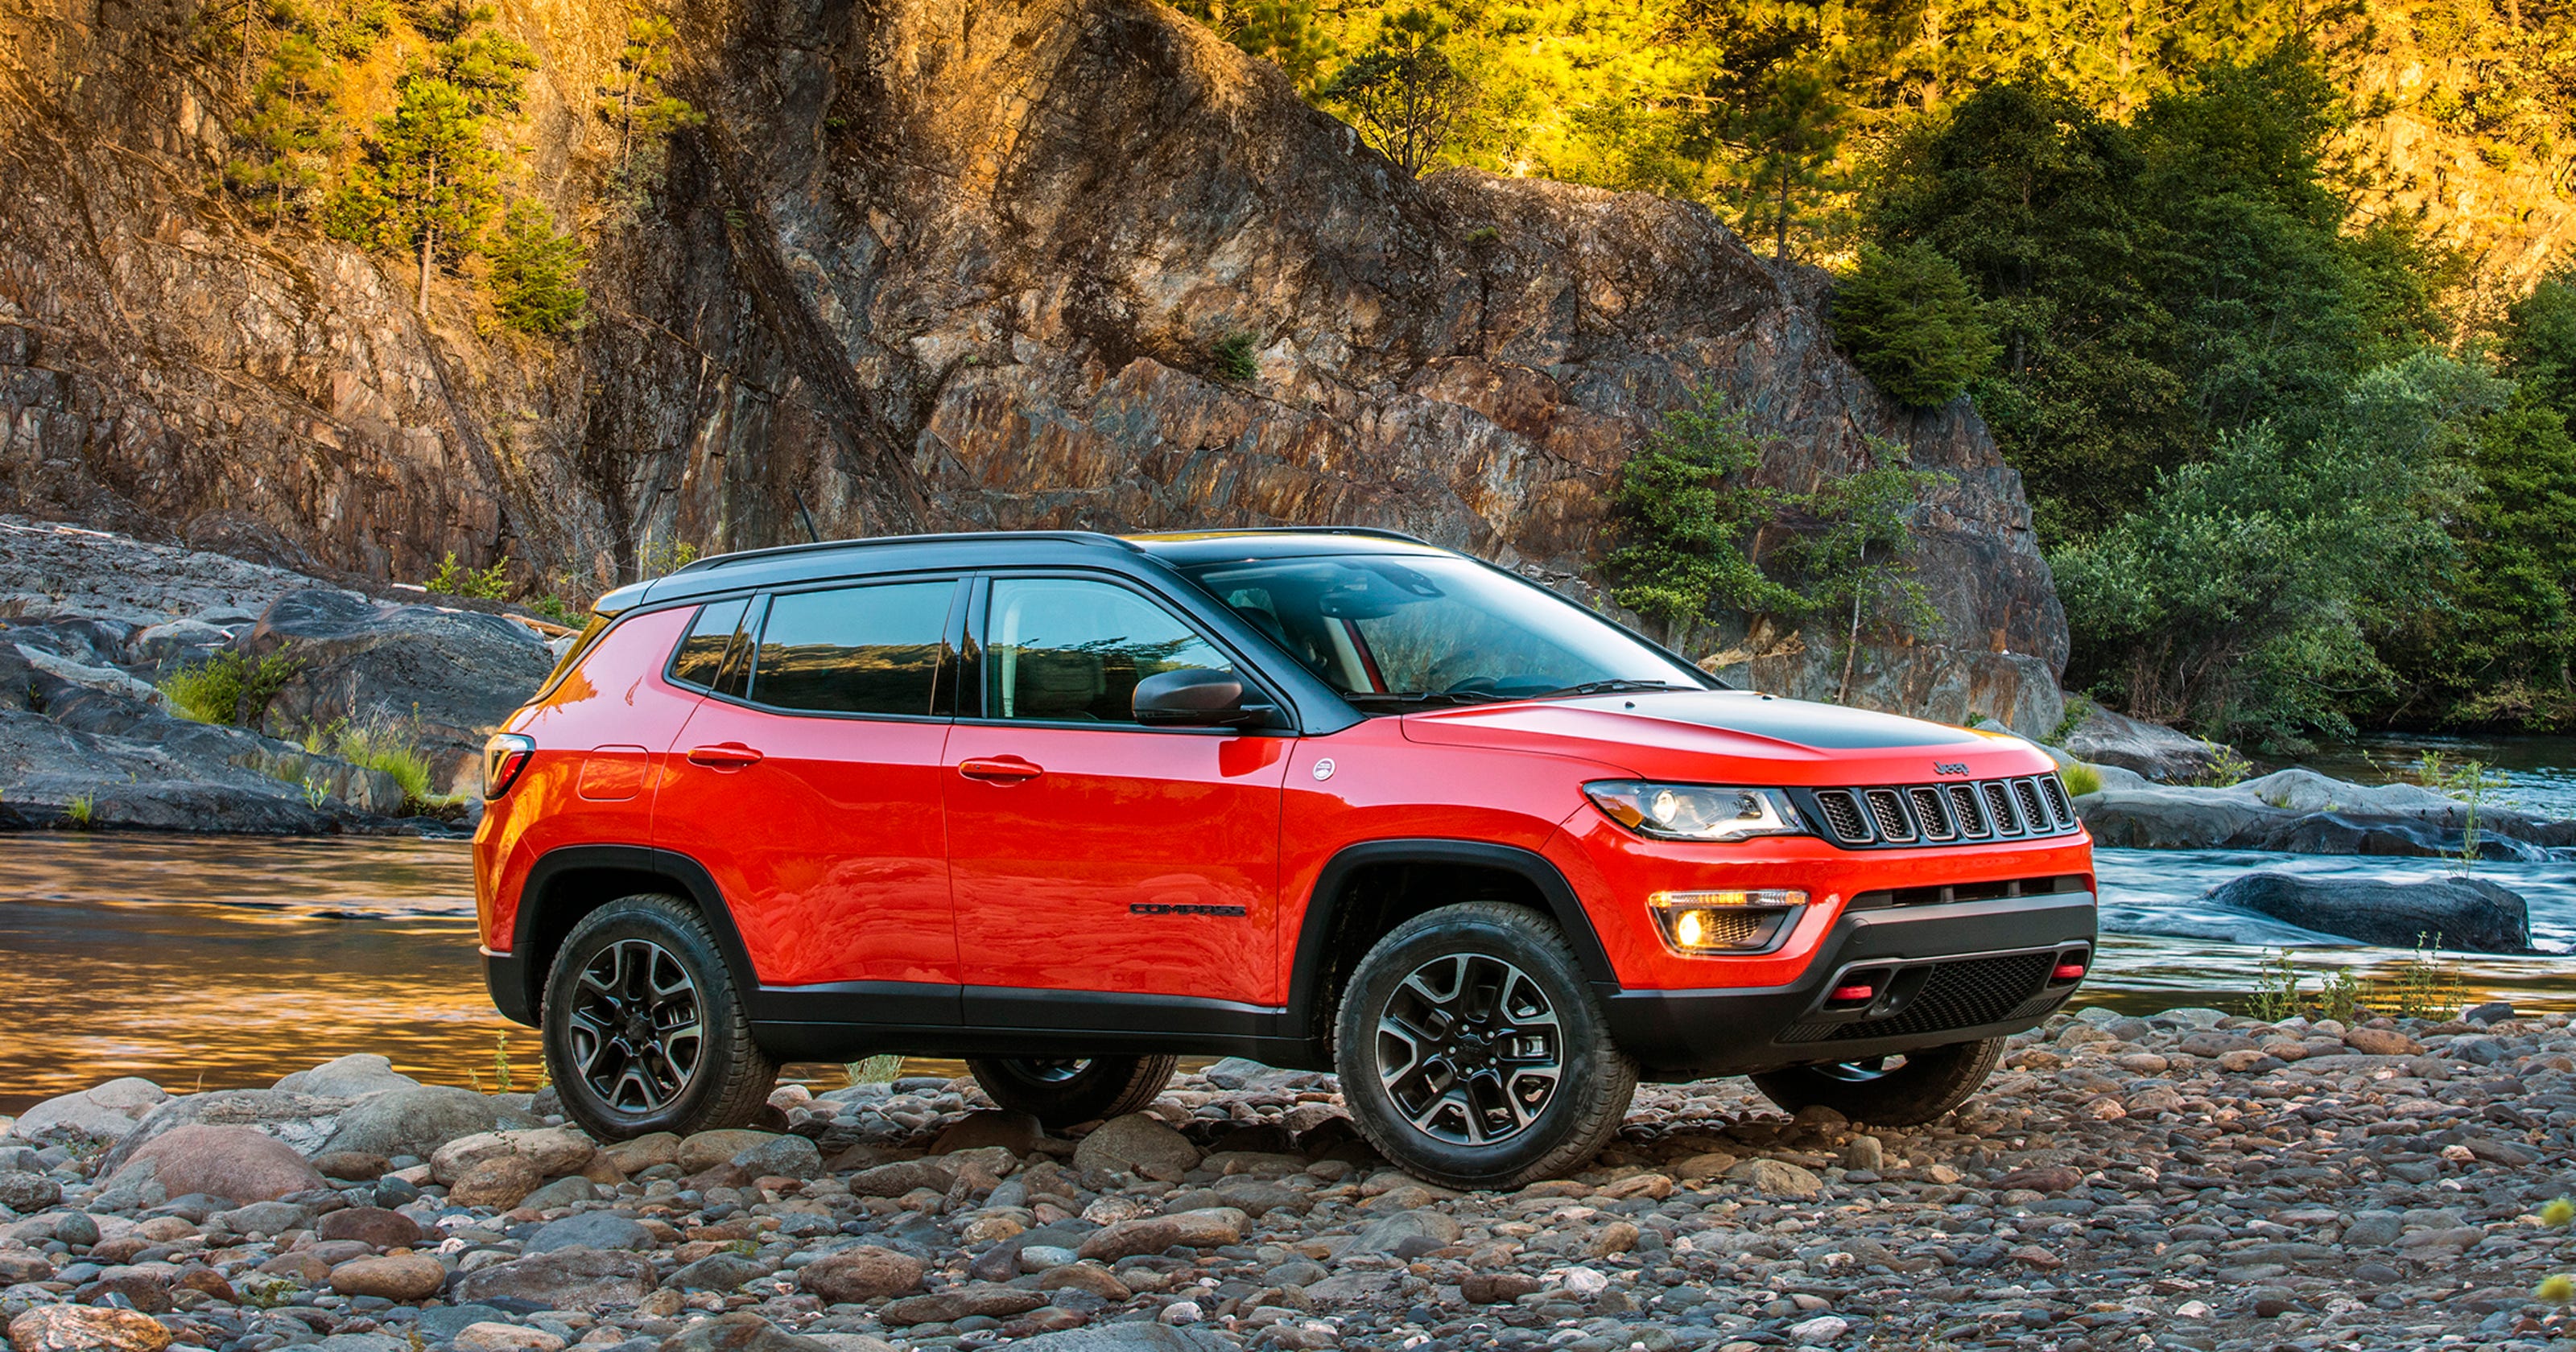 2017 Jeep Compass makes its North American debut today in ...